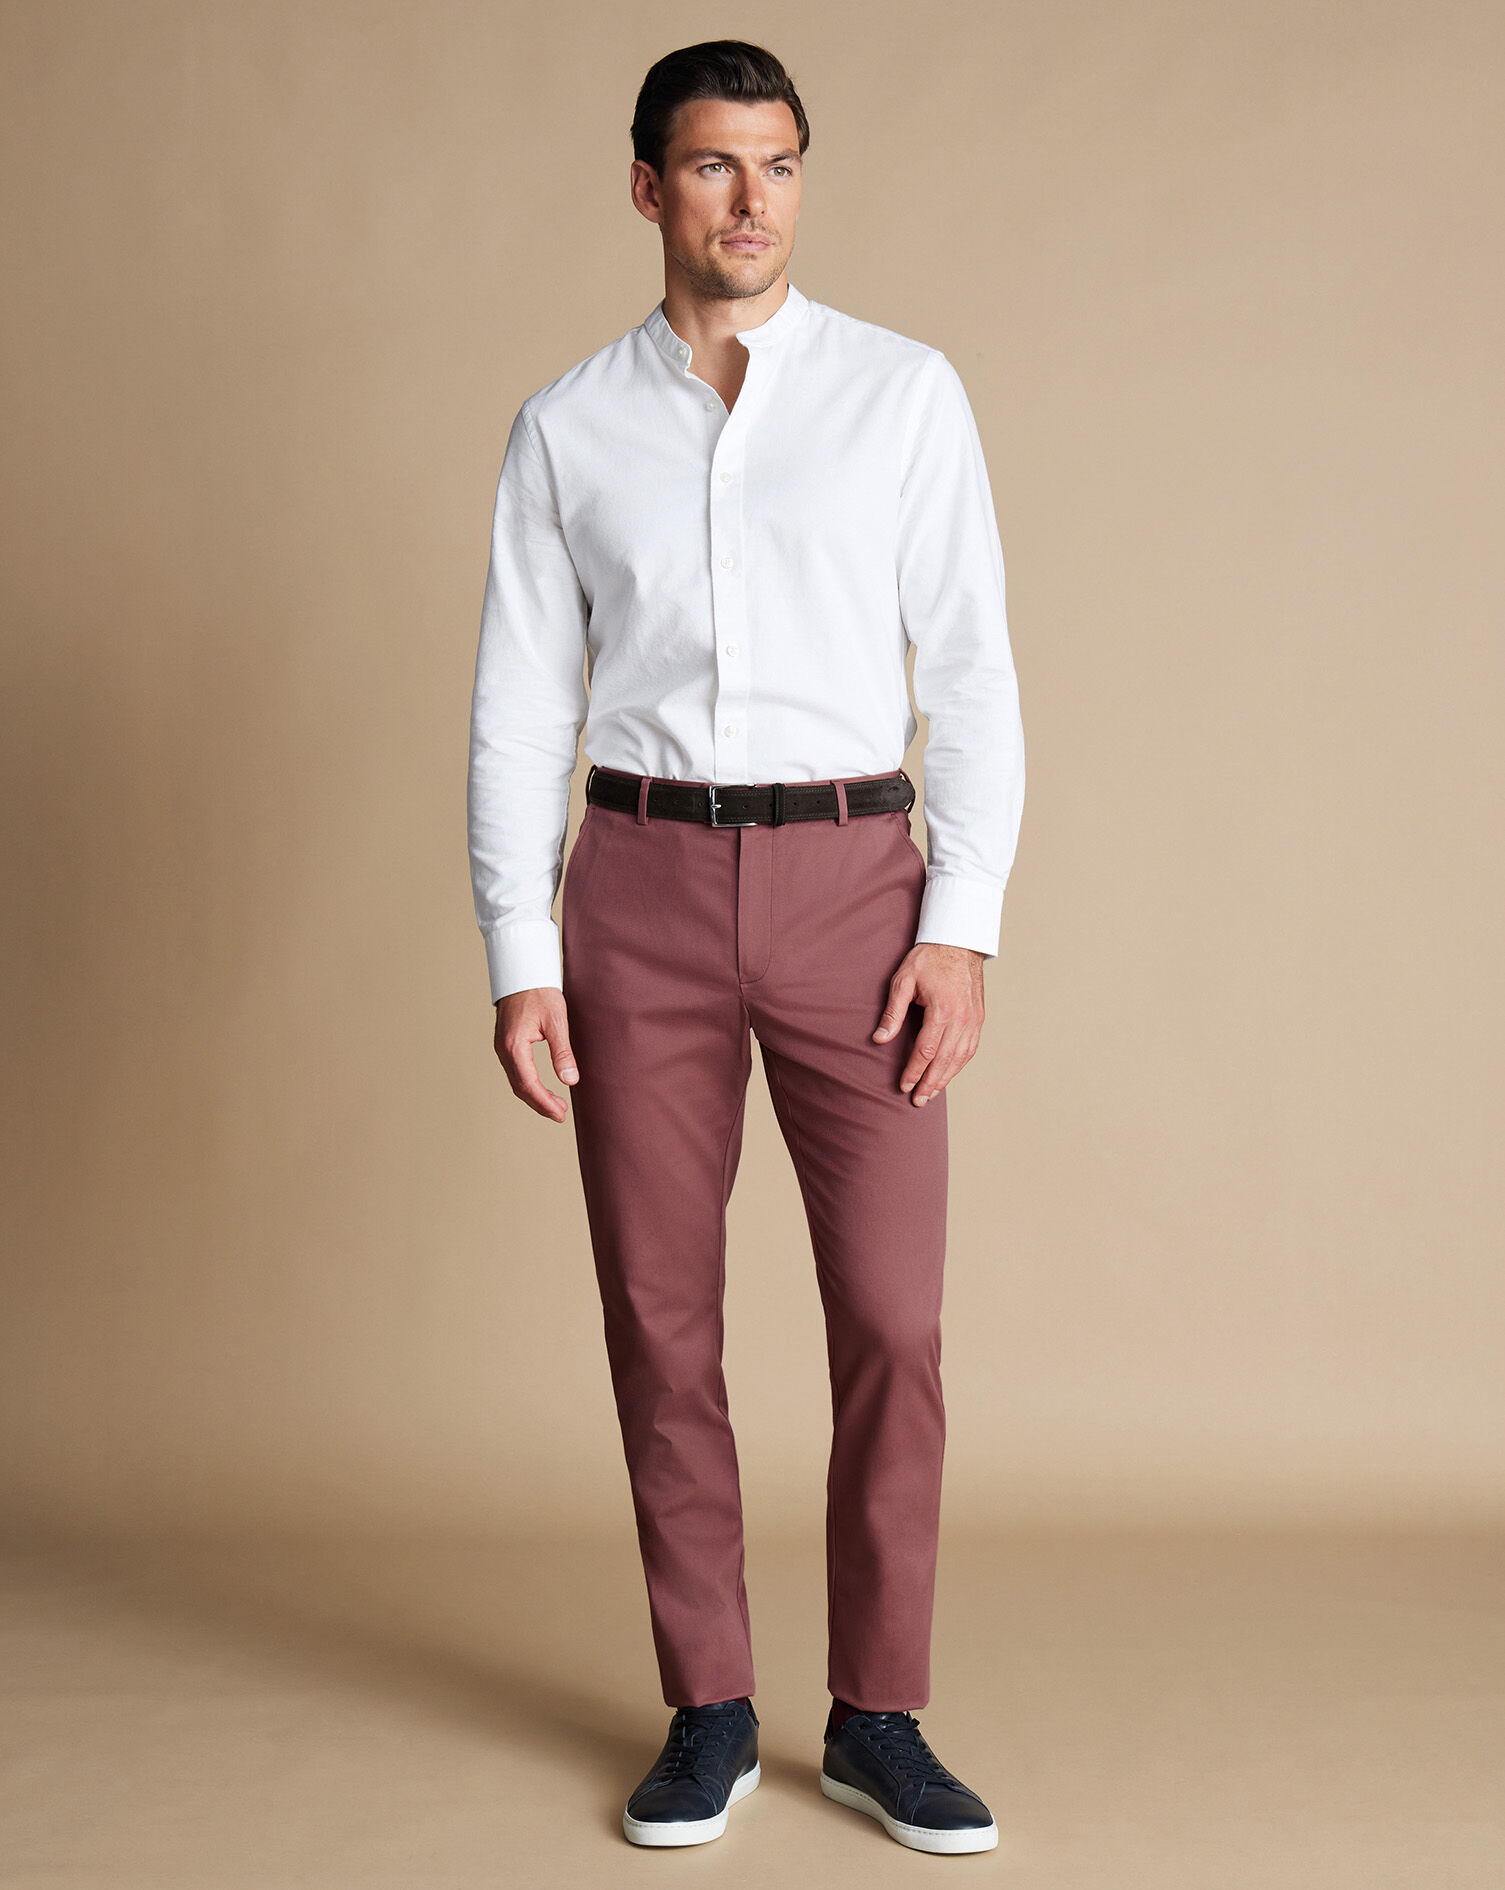 Will a red shirt go with dark brown pants? - Quora